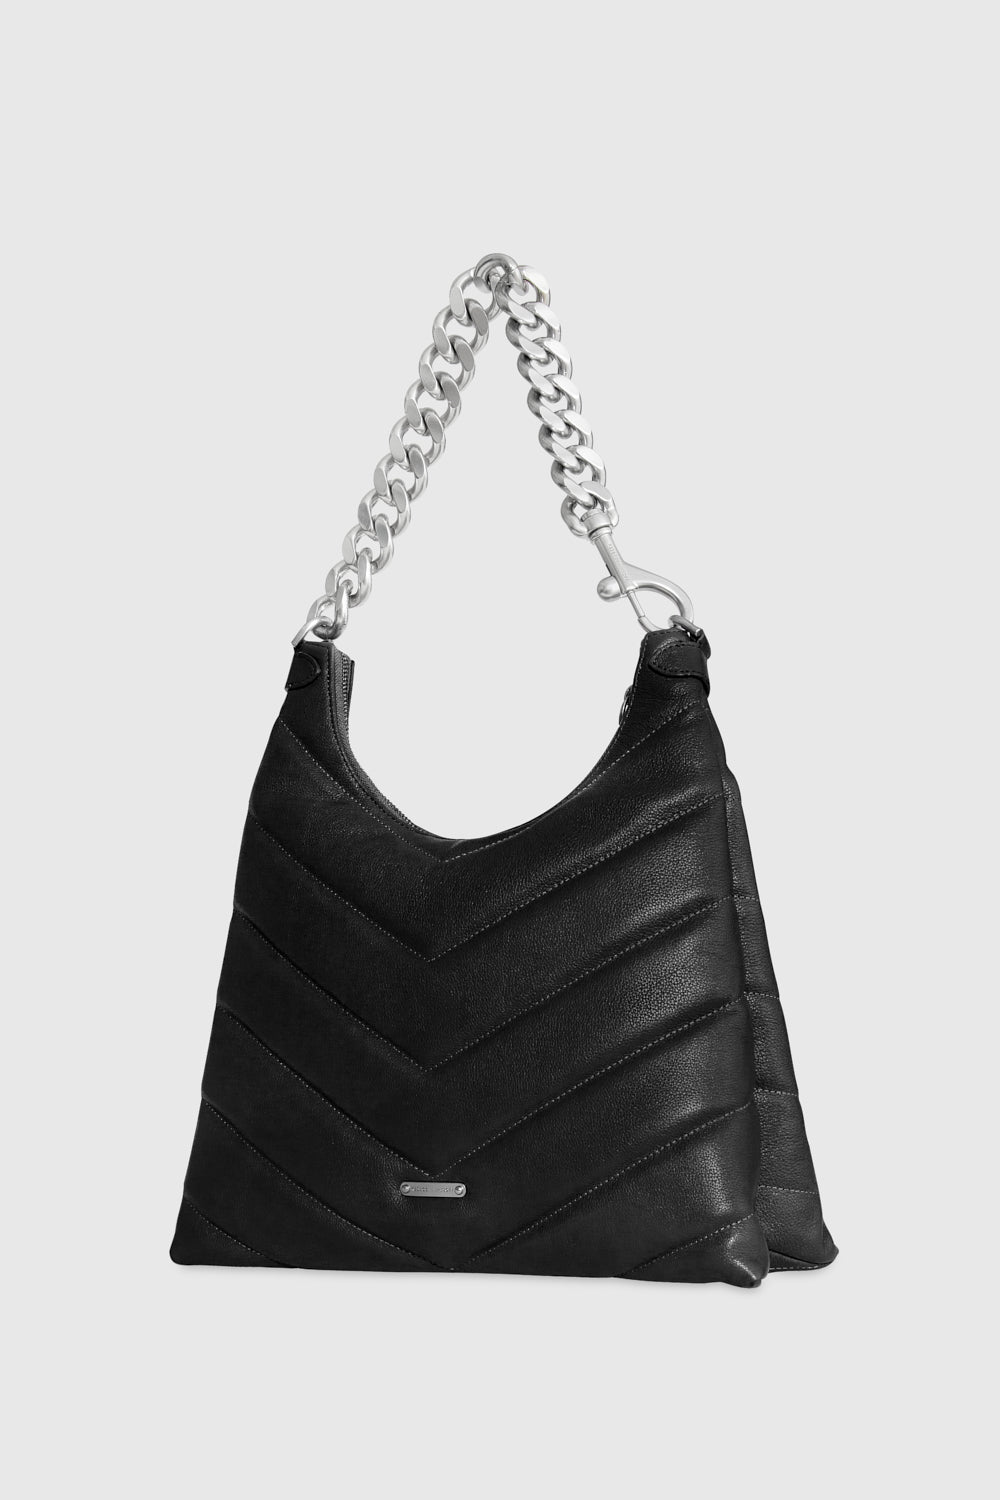 Maxi Hobo Bag - Luxe Finds UK